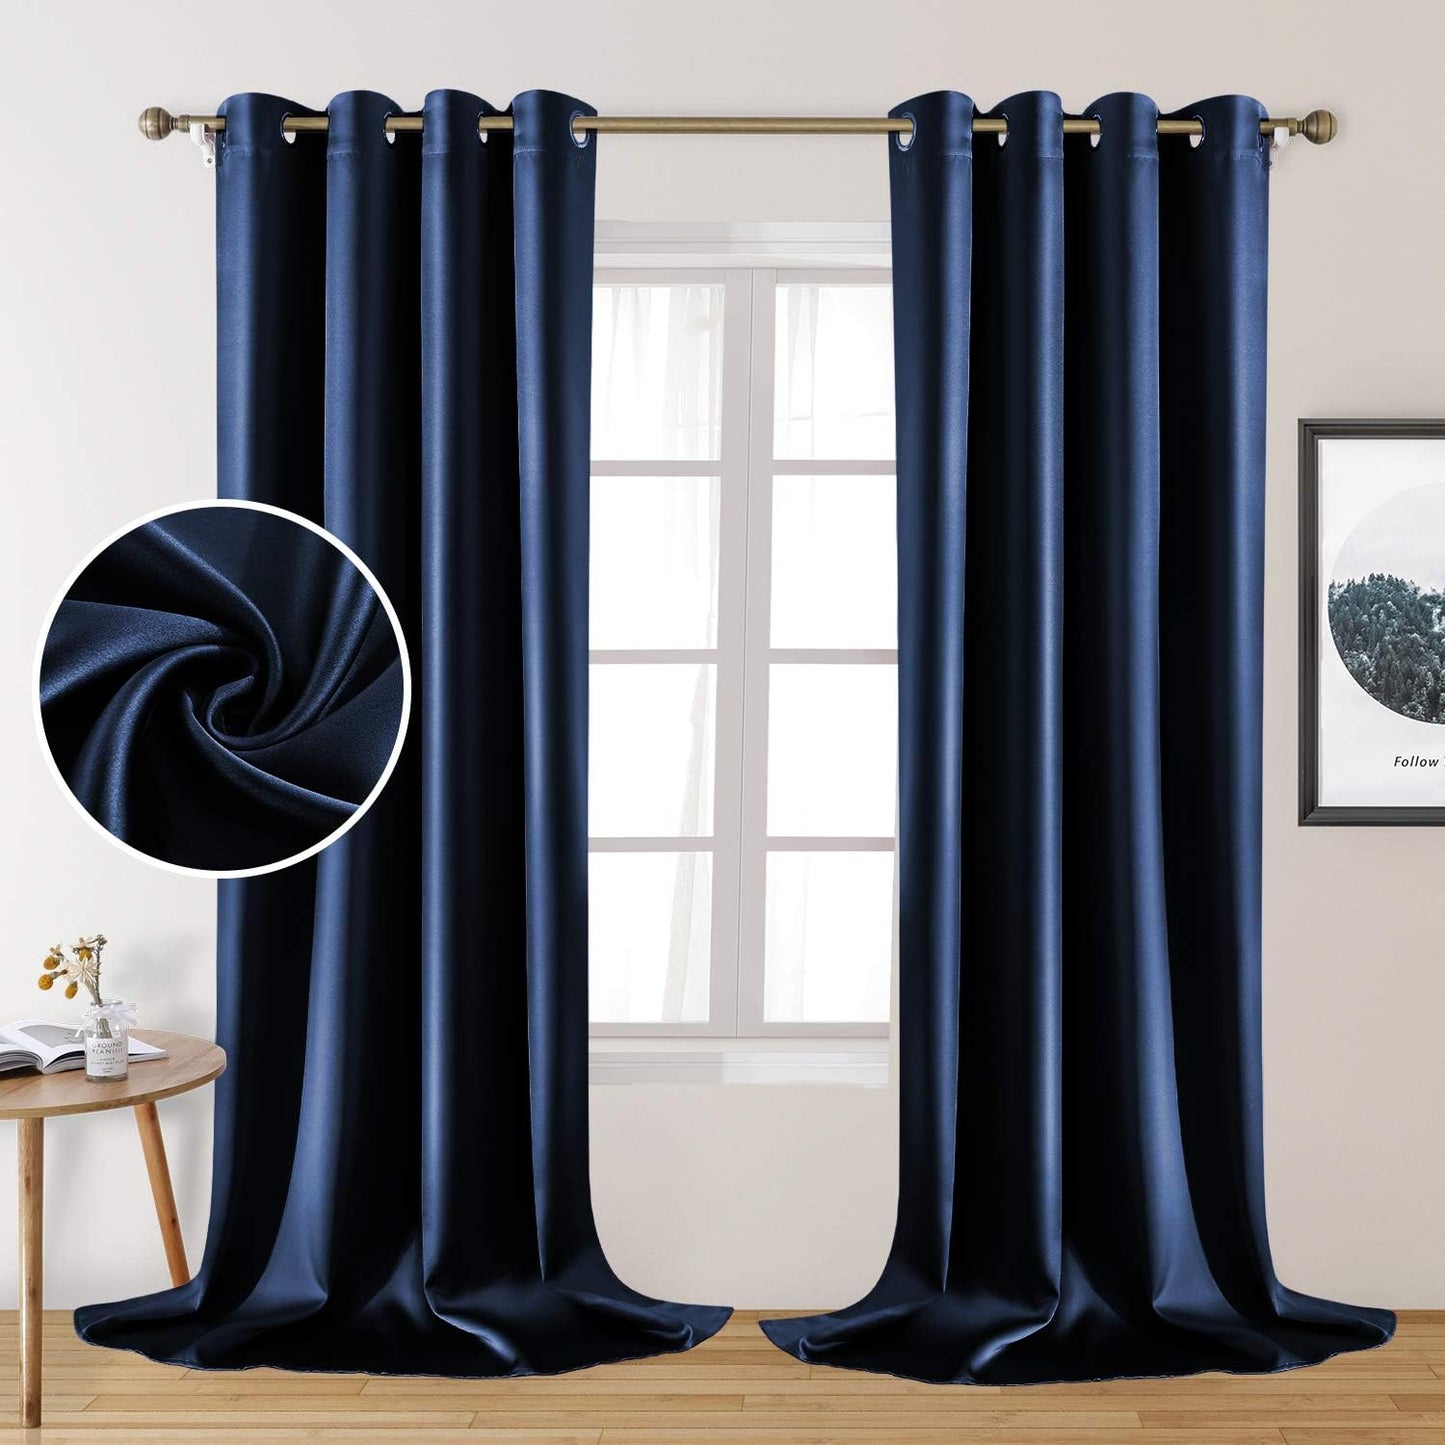 HOMEIDEAS Gold Blackout Curtains, Faux Silk for Bedroom 52 X 84 Inch Room Darkening Satin Thermal Insulated Drapes for Window, Indoor, Living Room, 2 Panels  HOMEIDEAS Navy Blue 52" X 108" 